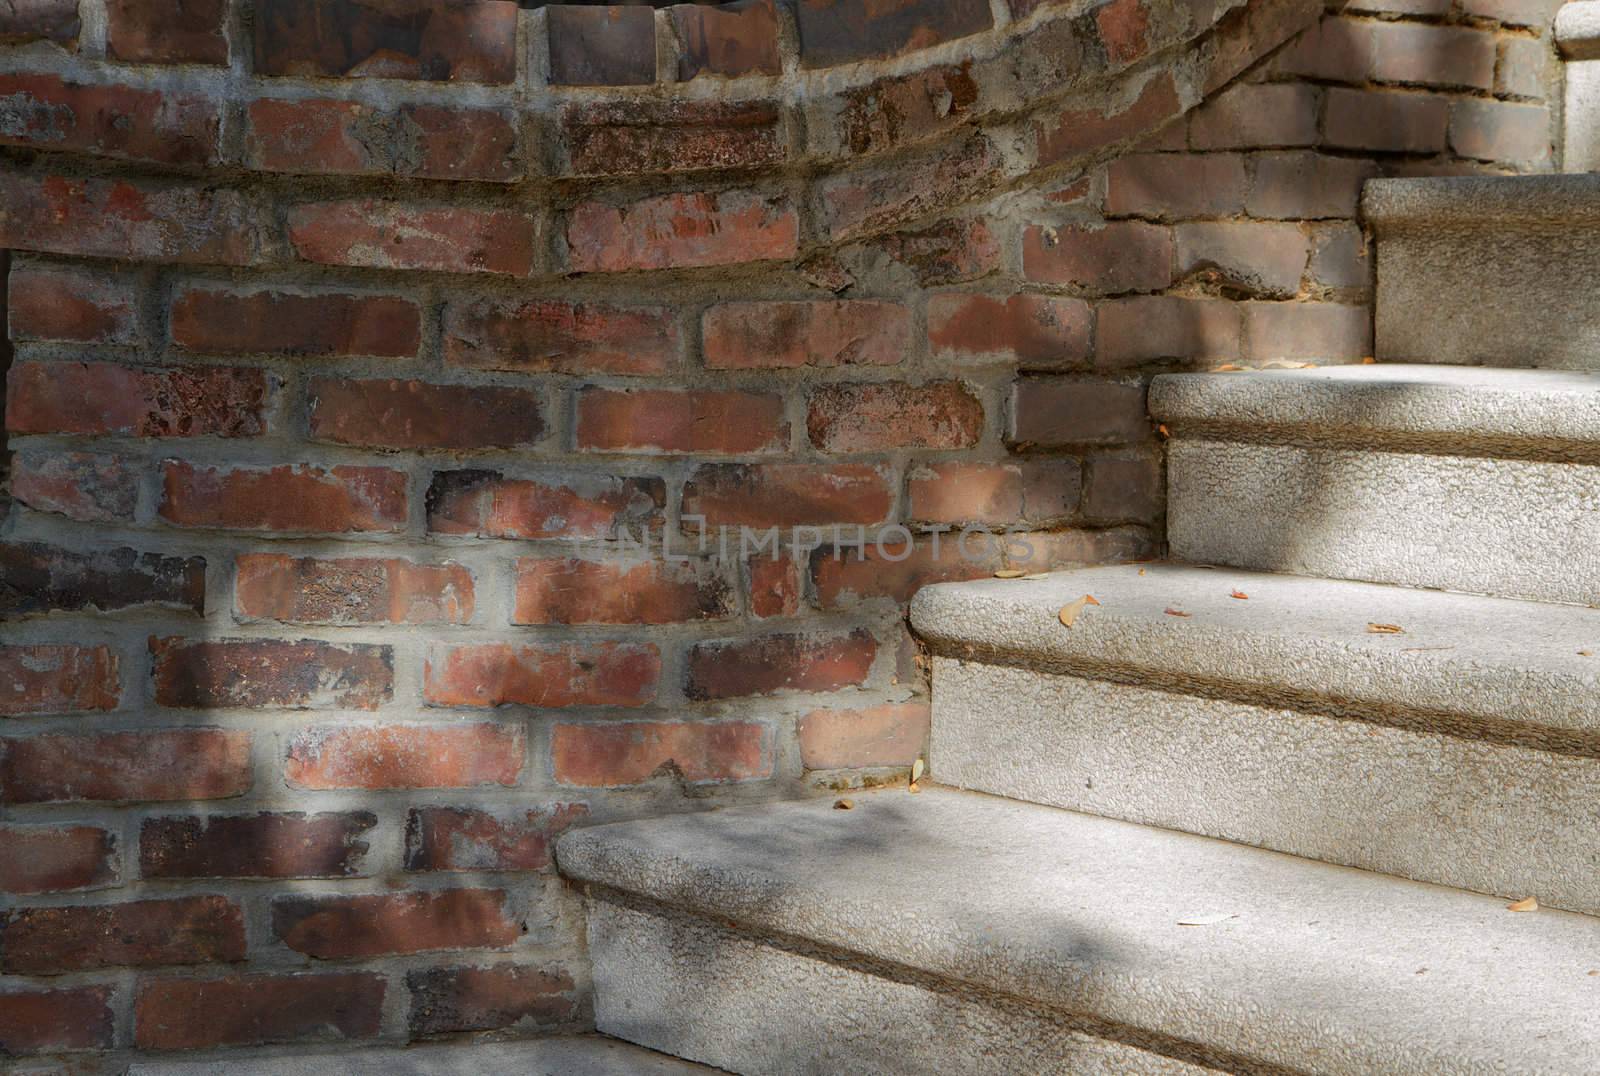 Brick and stone stairs by bobkeenan